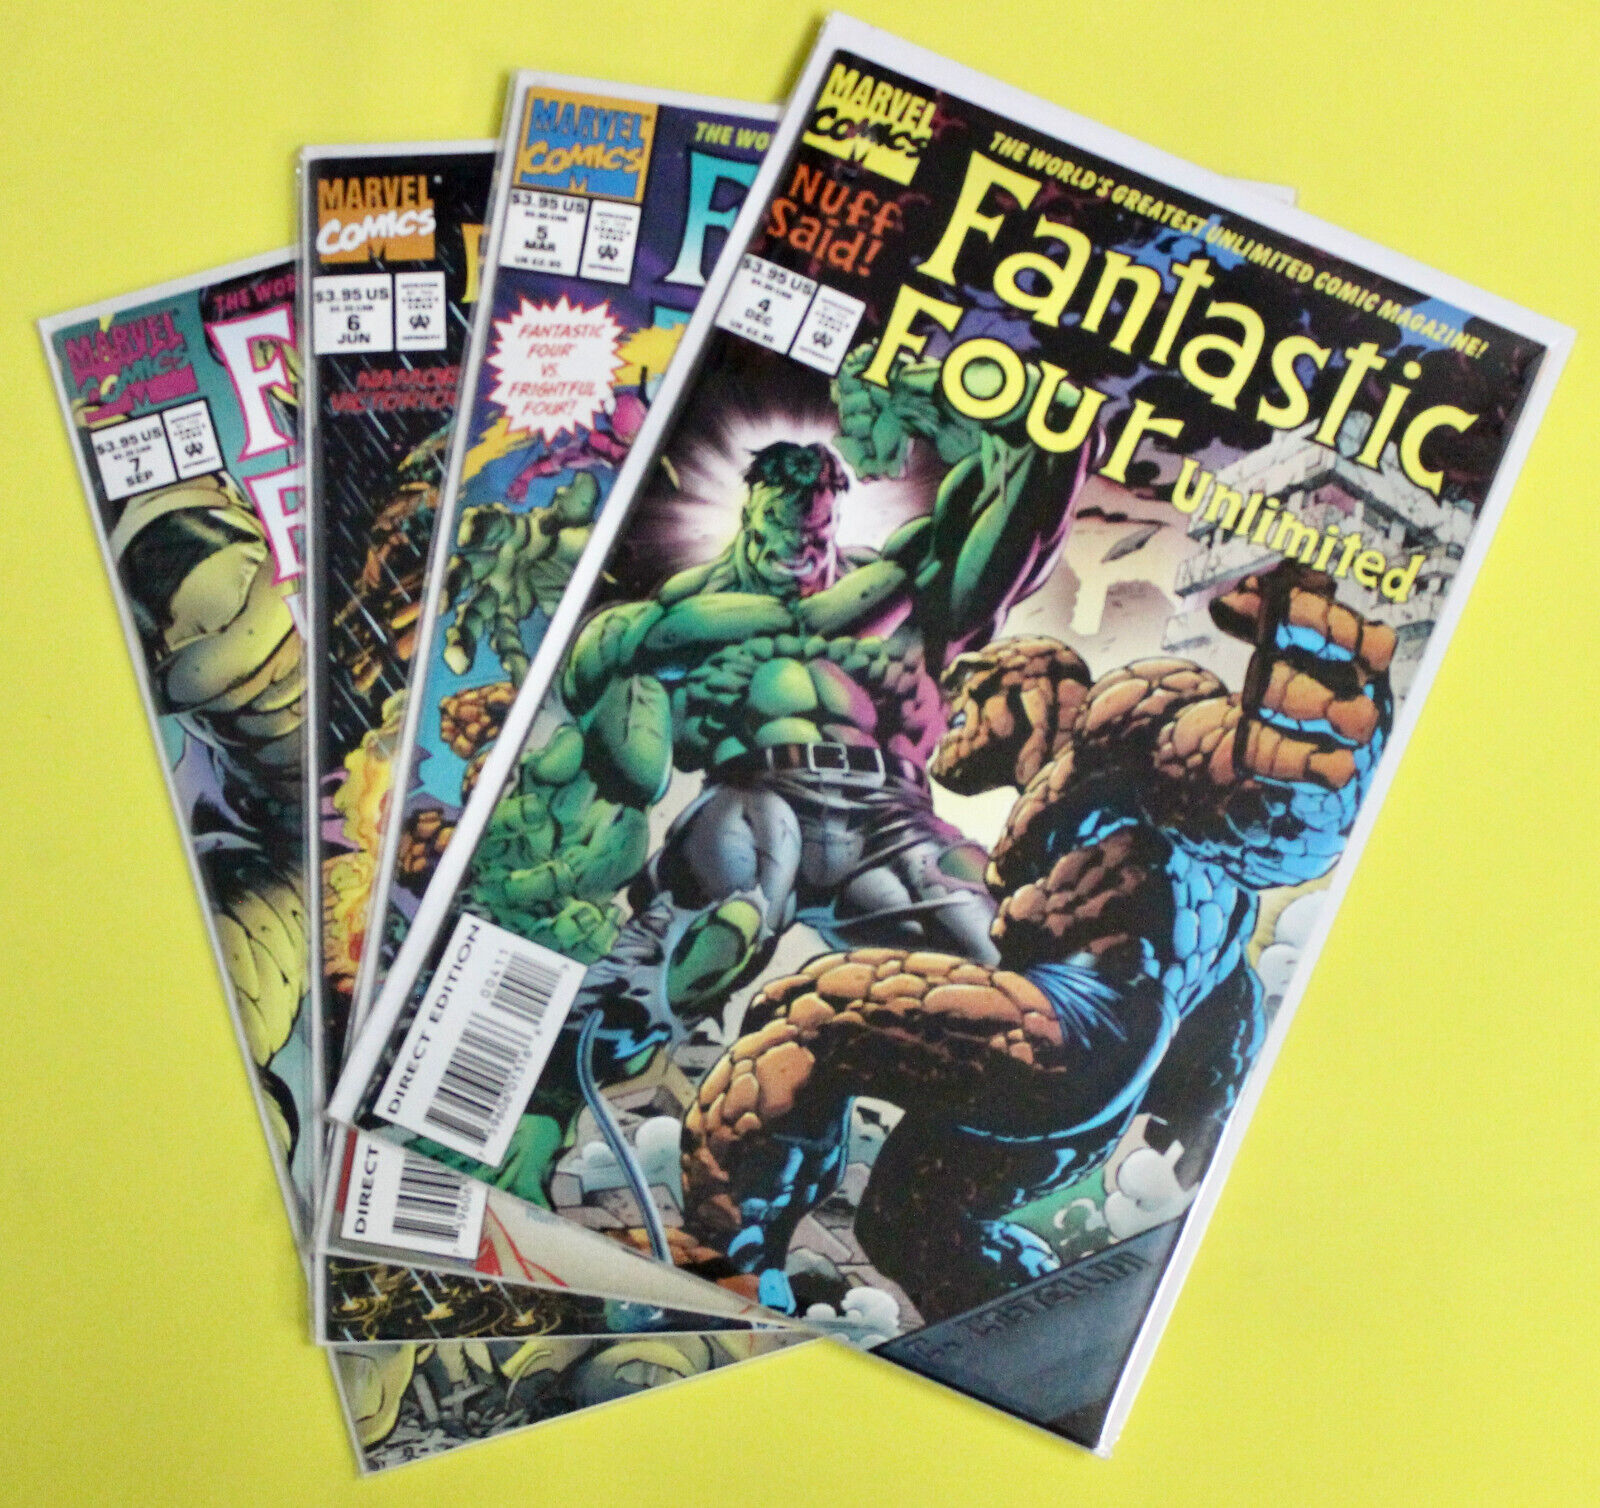 "FANTASTIC FOUR UNLIMITED" LOT - 4 ISSUES #4 TO #7 - 1994 -HIGH GRADE MODERN AGE